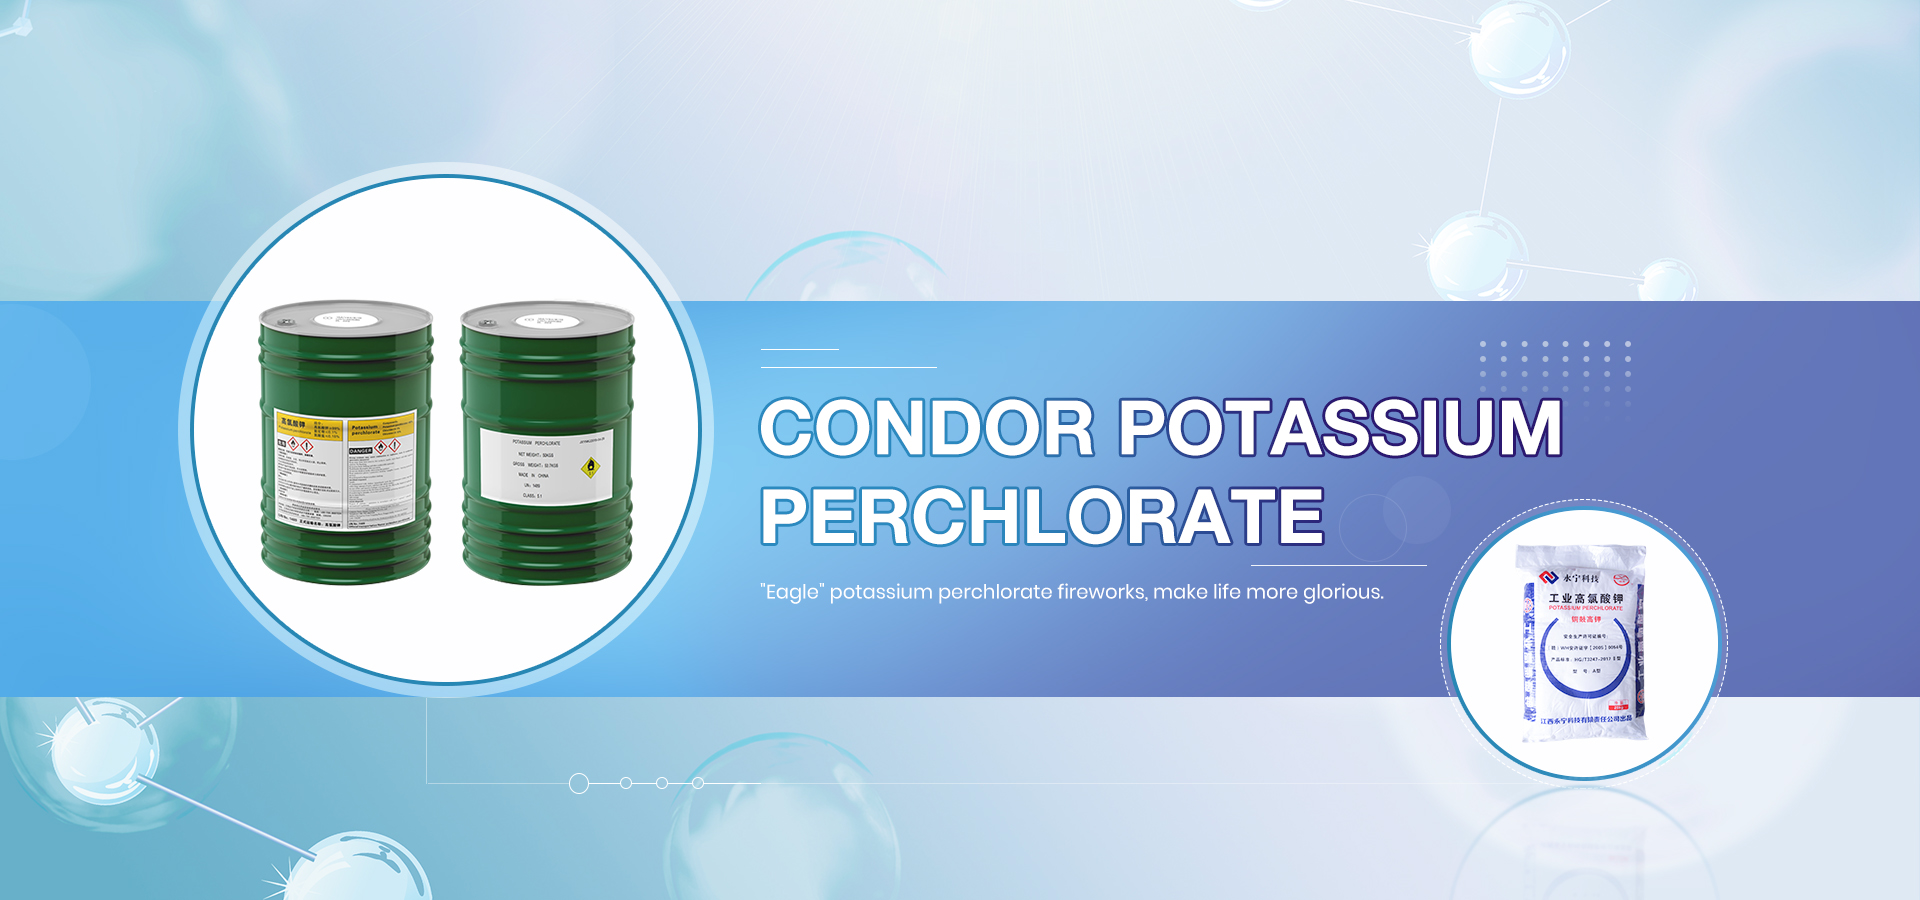 Potassium Perchlorate For Fireworks Manufacturing